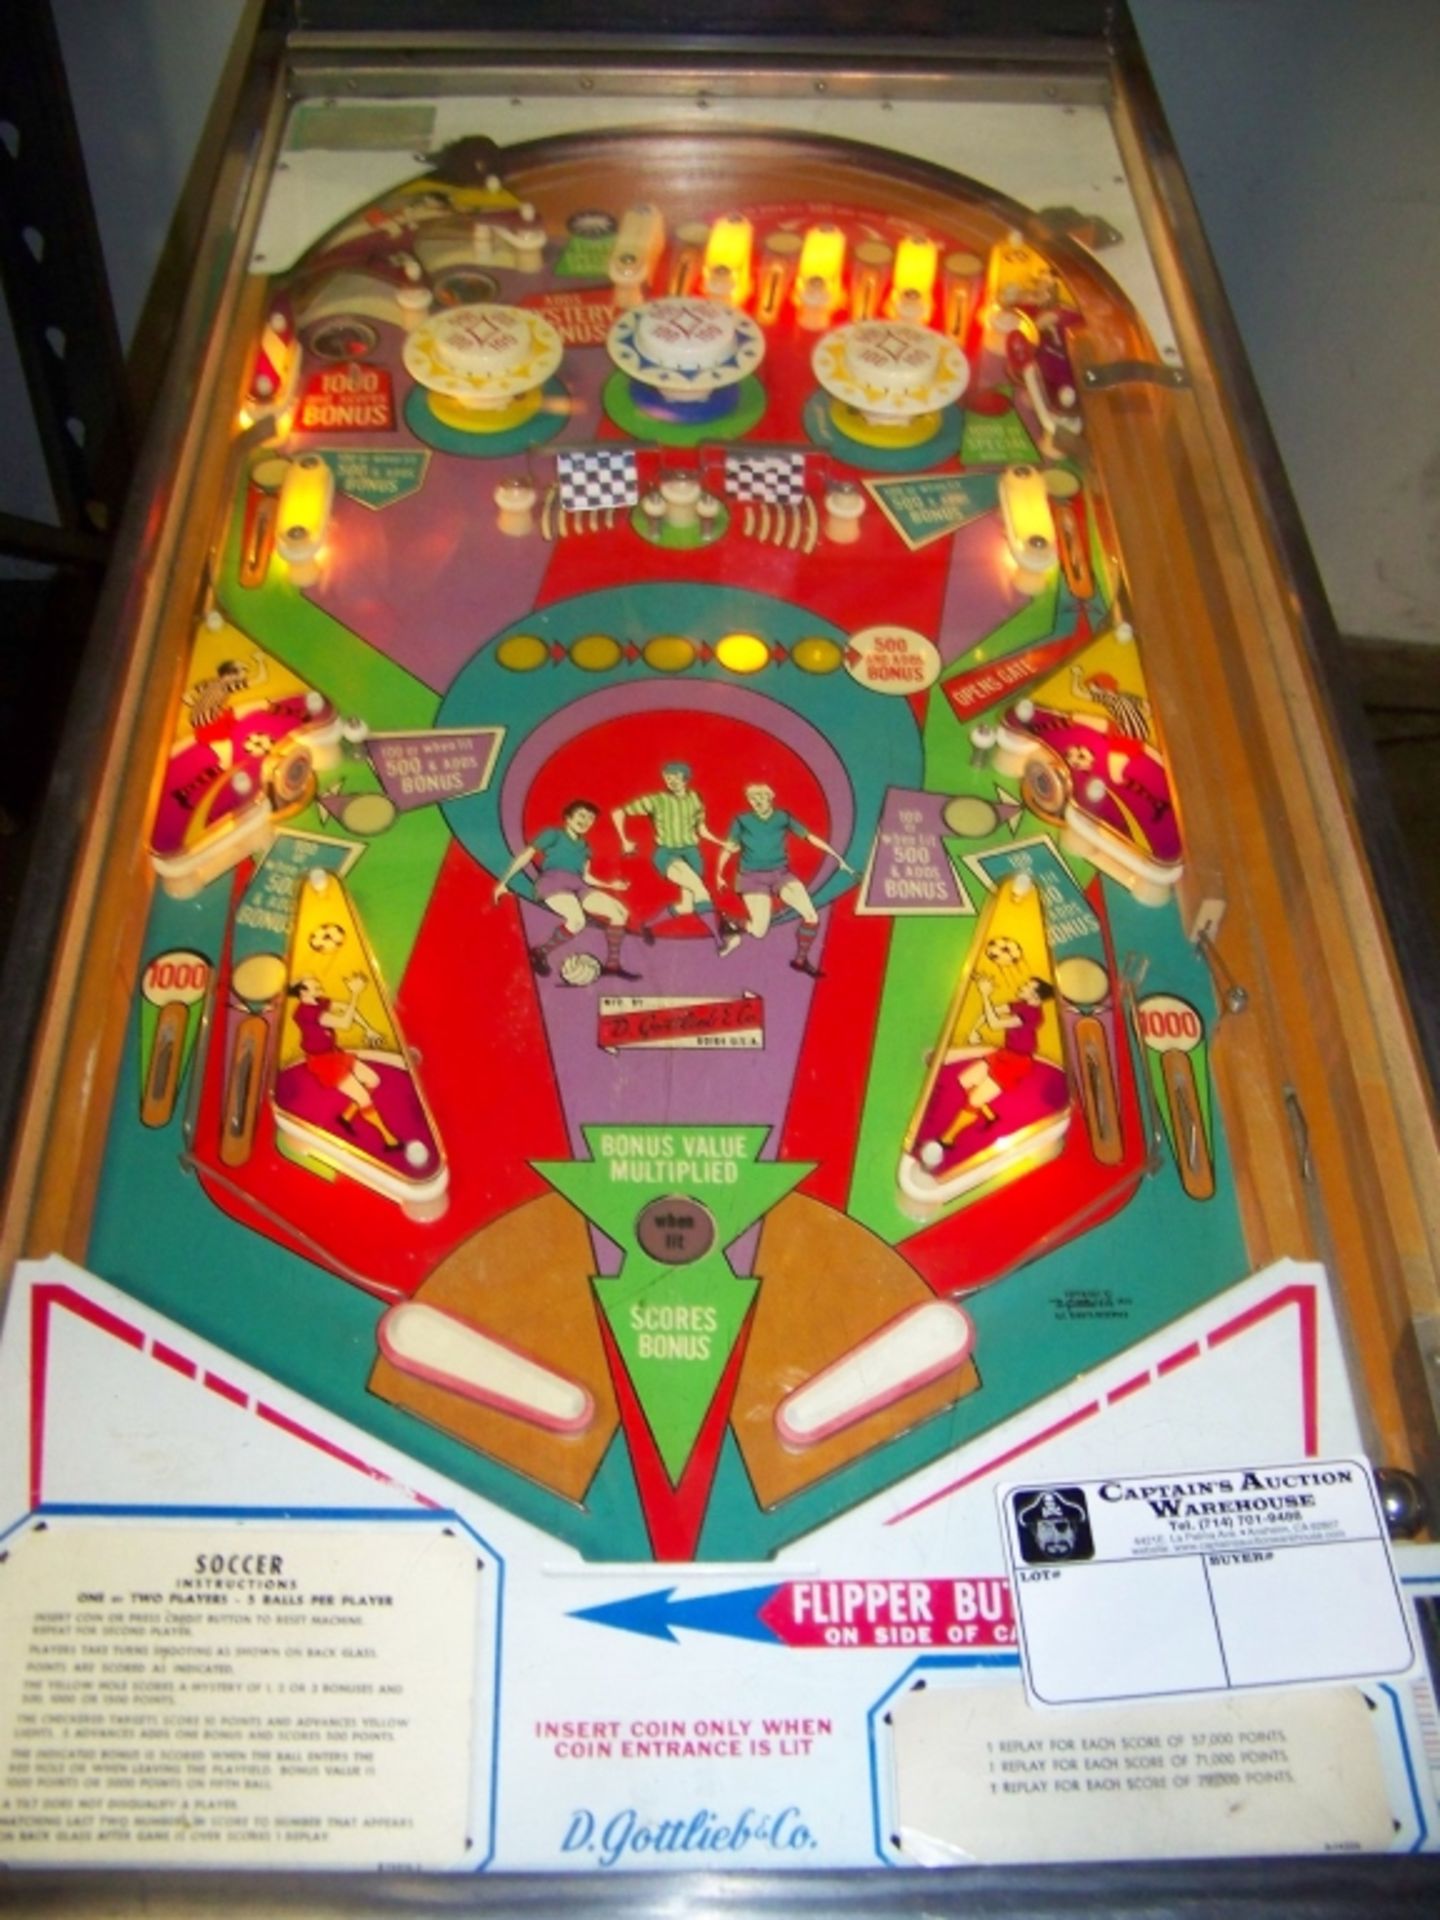 SOCCER PINBALL MACHINE ANIMATED BOX GOTTLIEB 1975 Item is in used condition. Evidence of wear and - Image 4 of 8